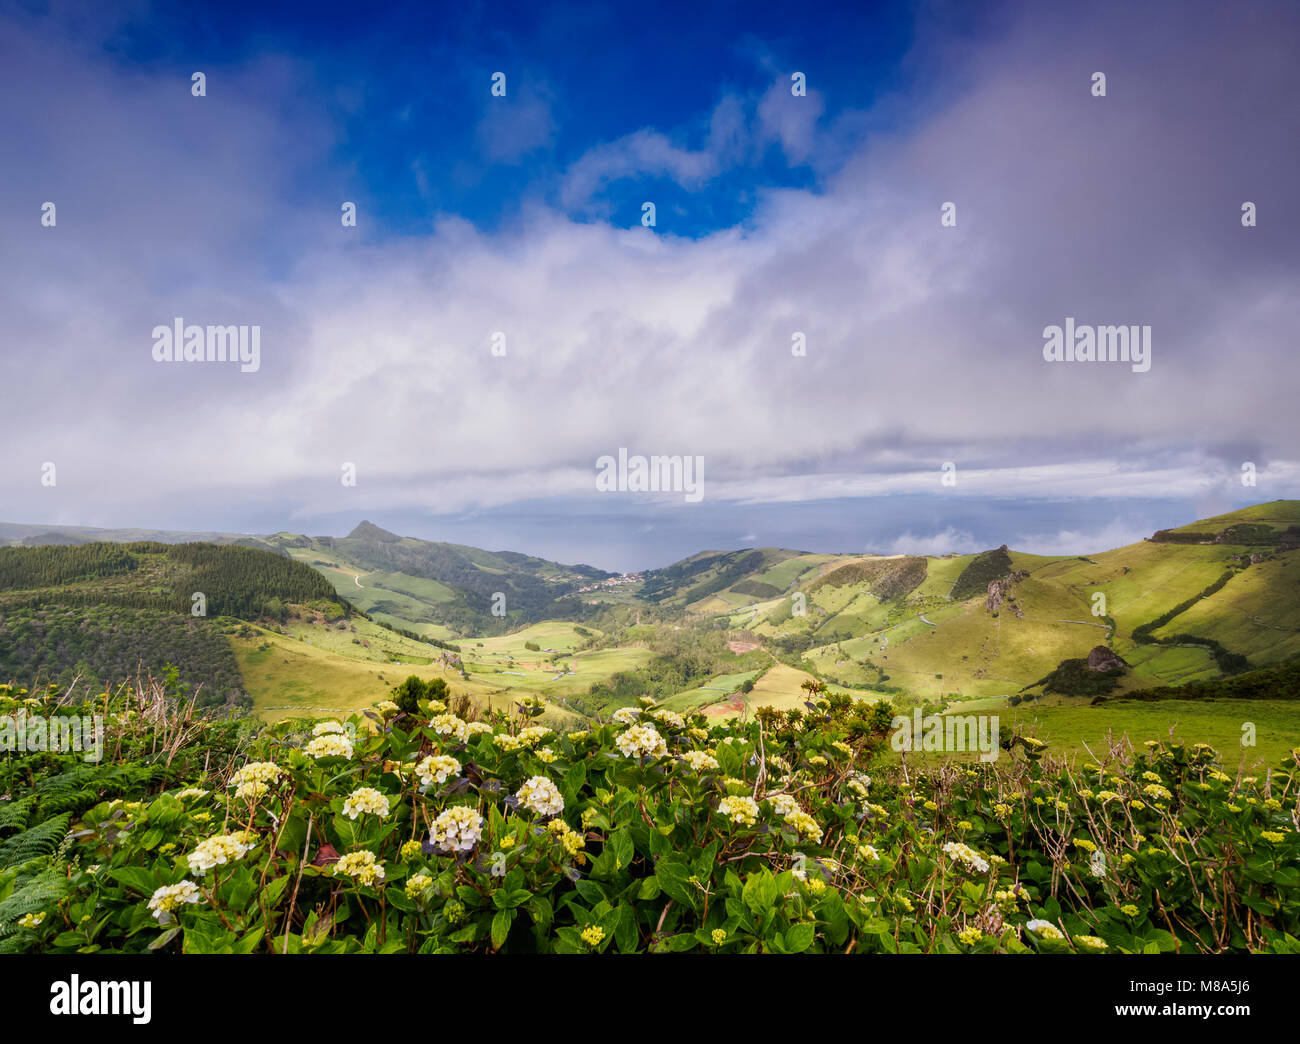 Landscape of Flores Island, Azores, Portugal Stock Photo